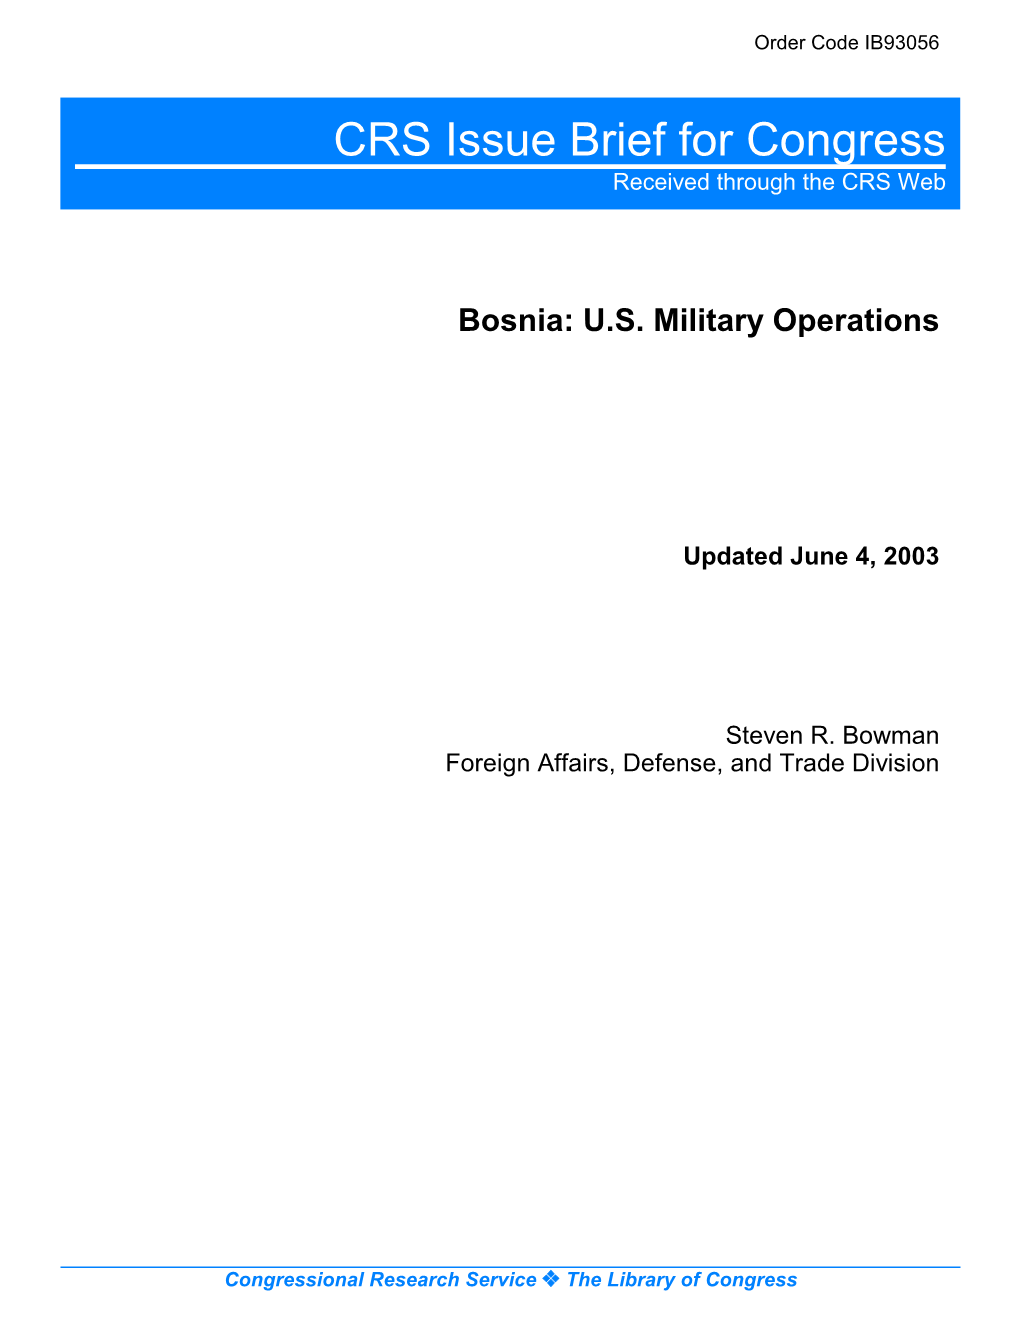 US Military Operations